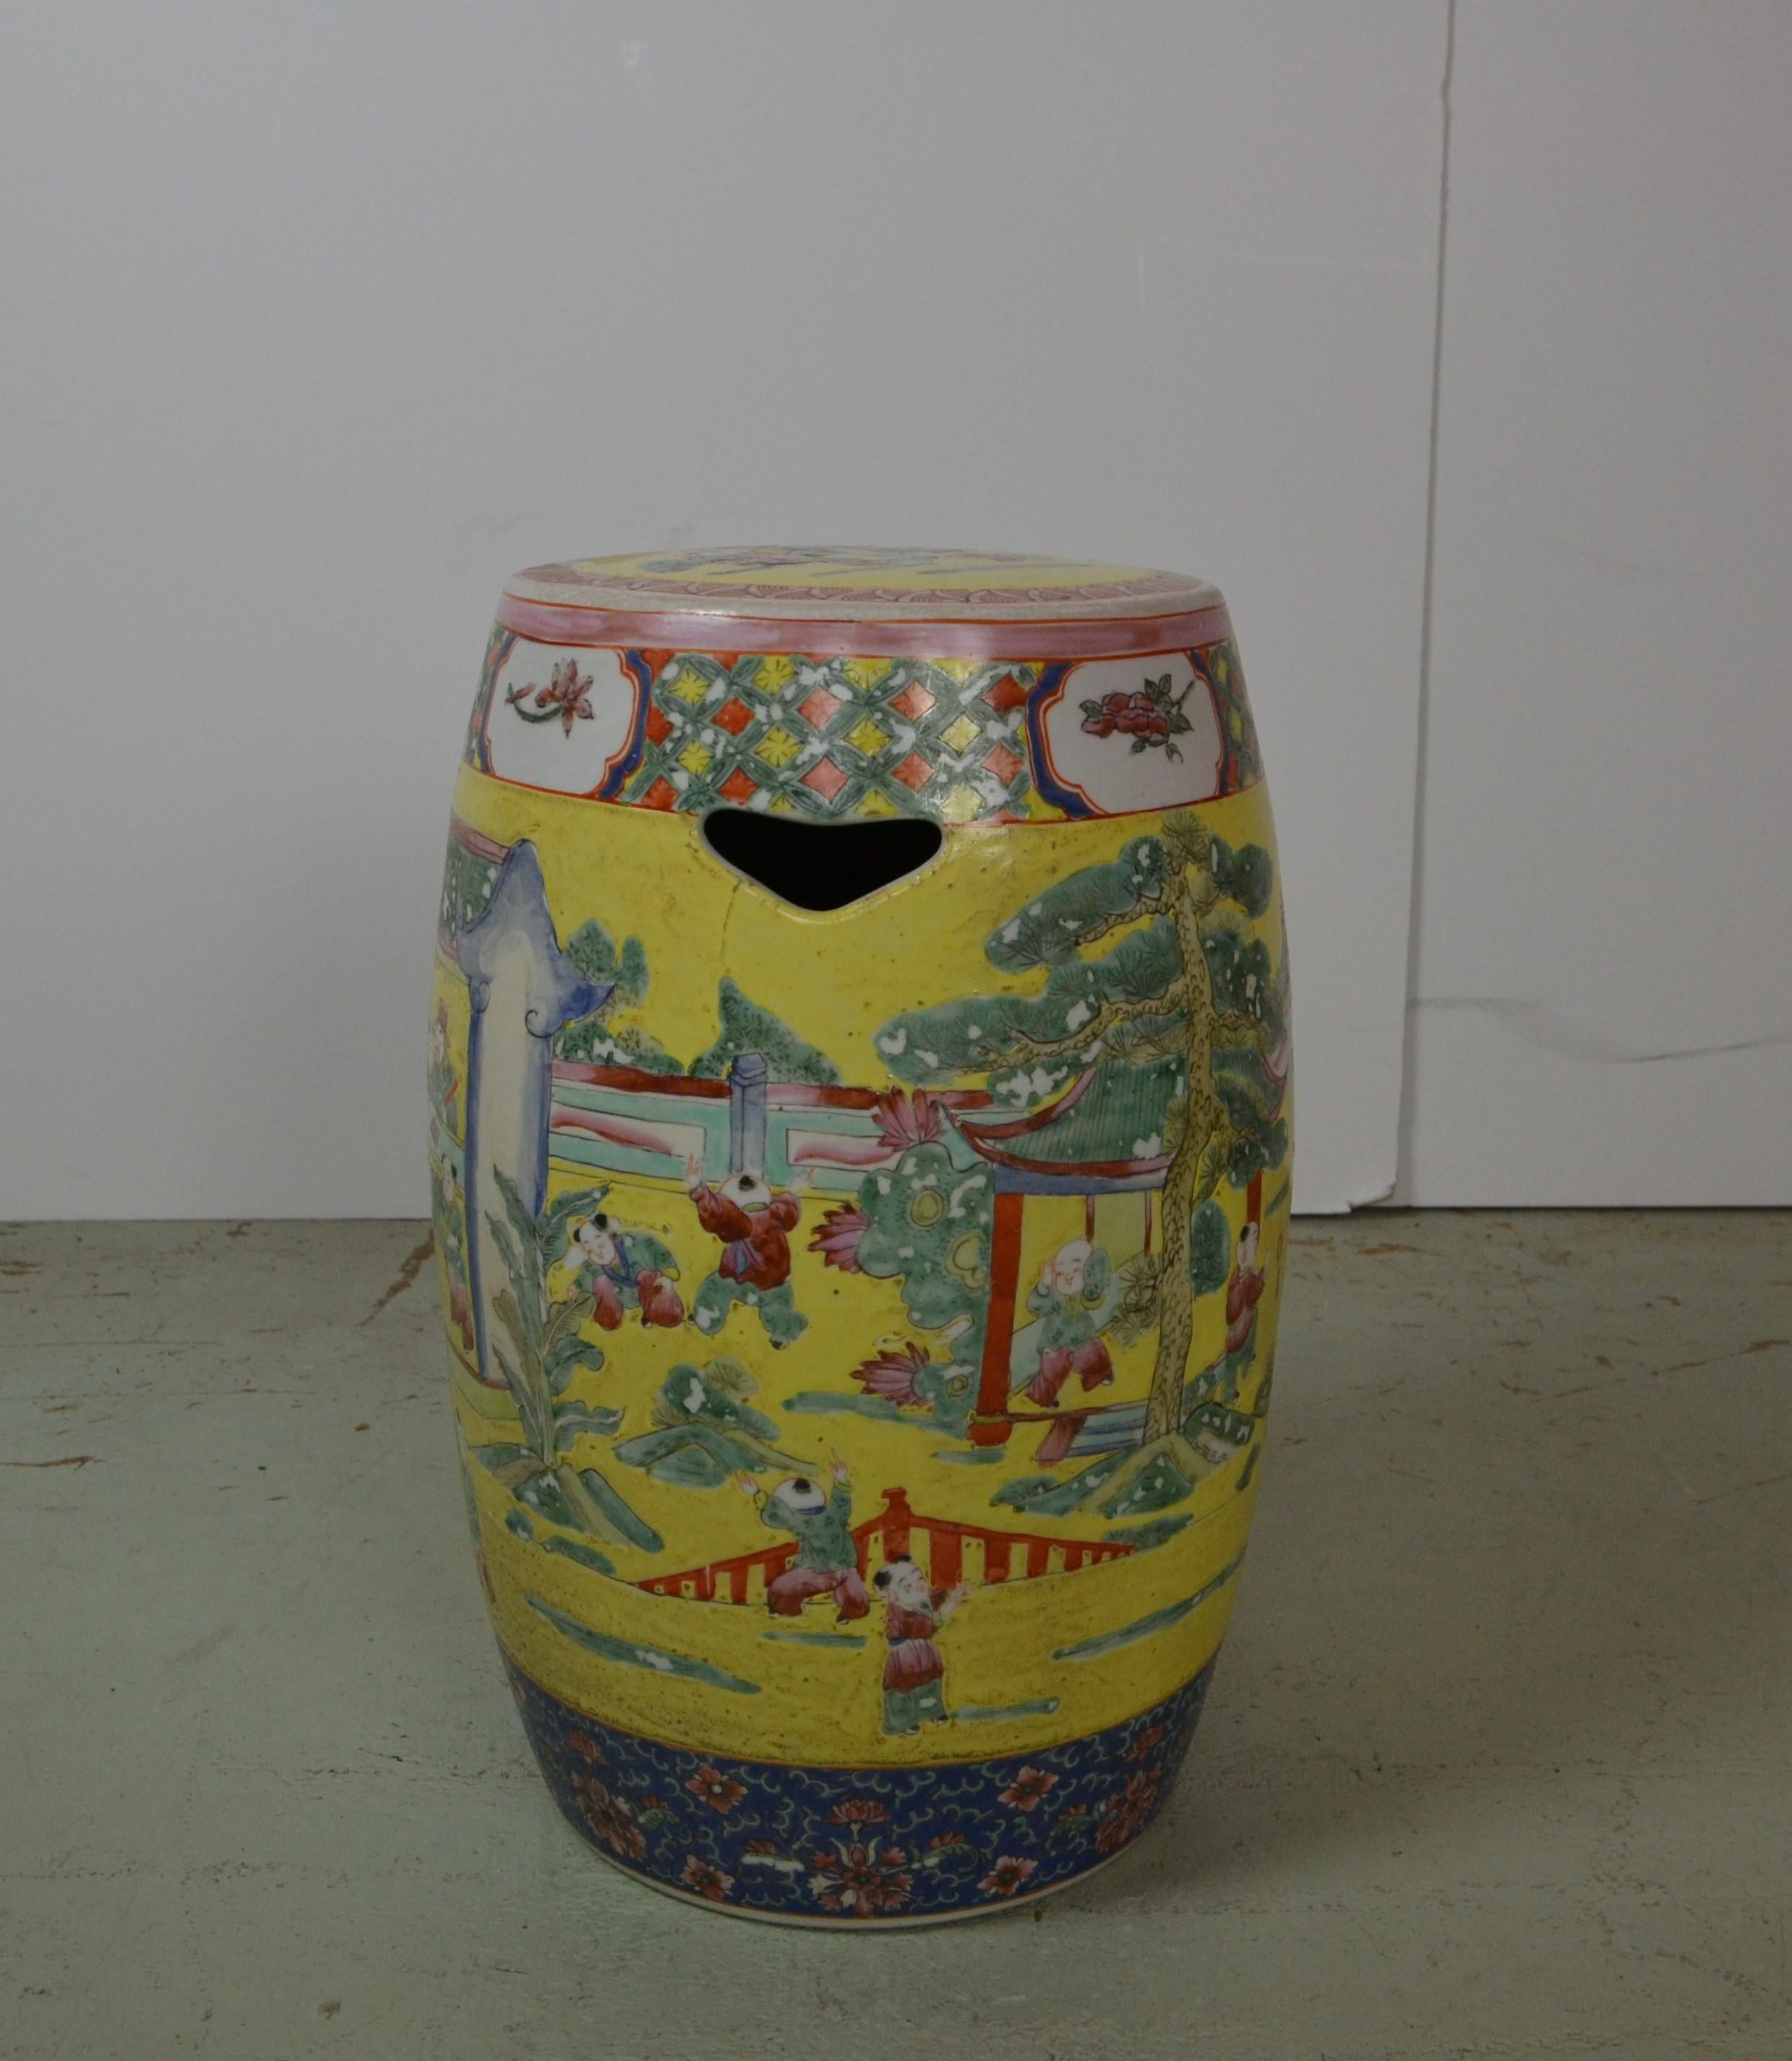 A profusely decorated Chinese garden seat. Features daily life with many figures in traditional Chinese dress. Multi-color enamels. Top and bottom bands with floral motif's. Measures: 12